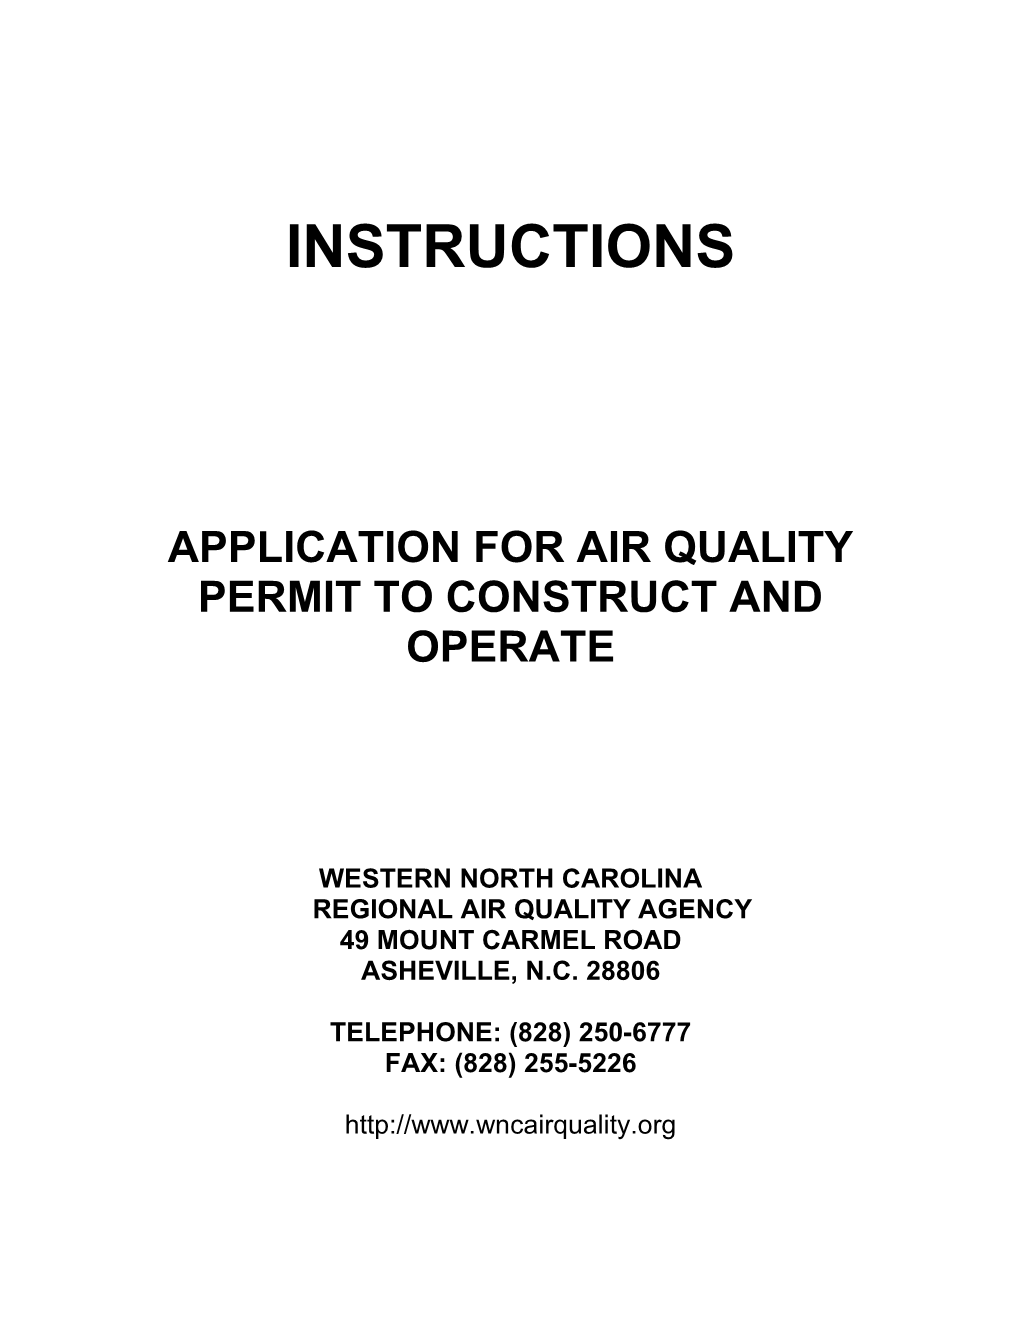 Application for Air Quality Permit